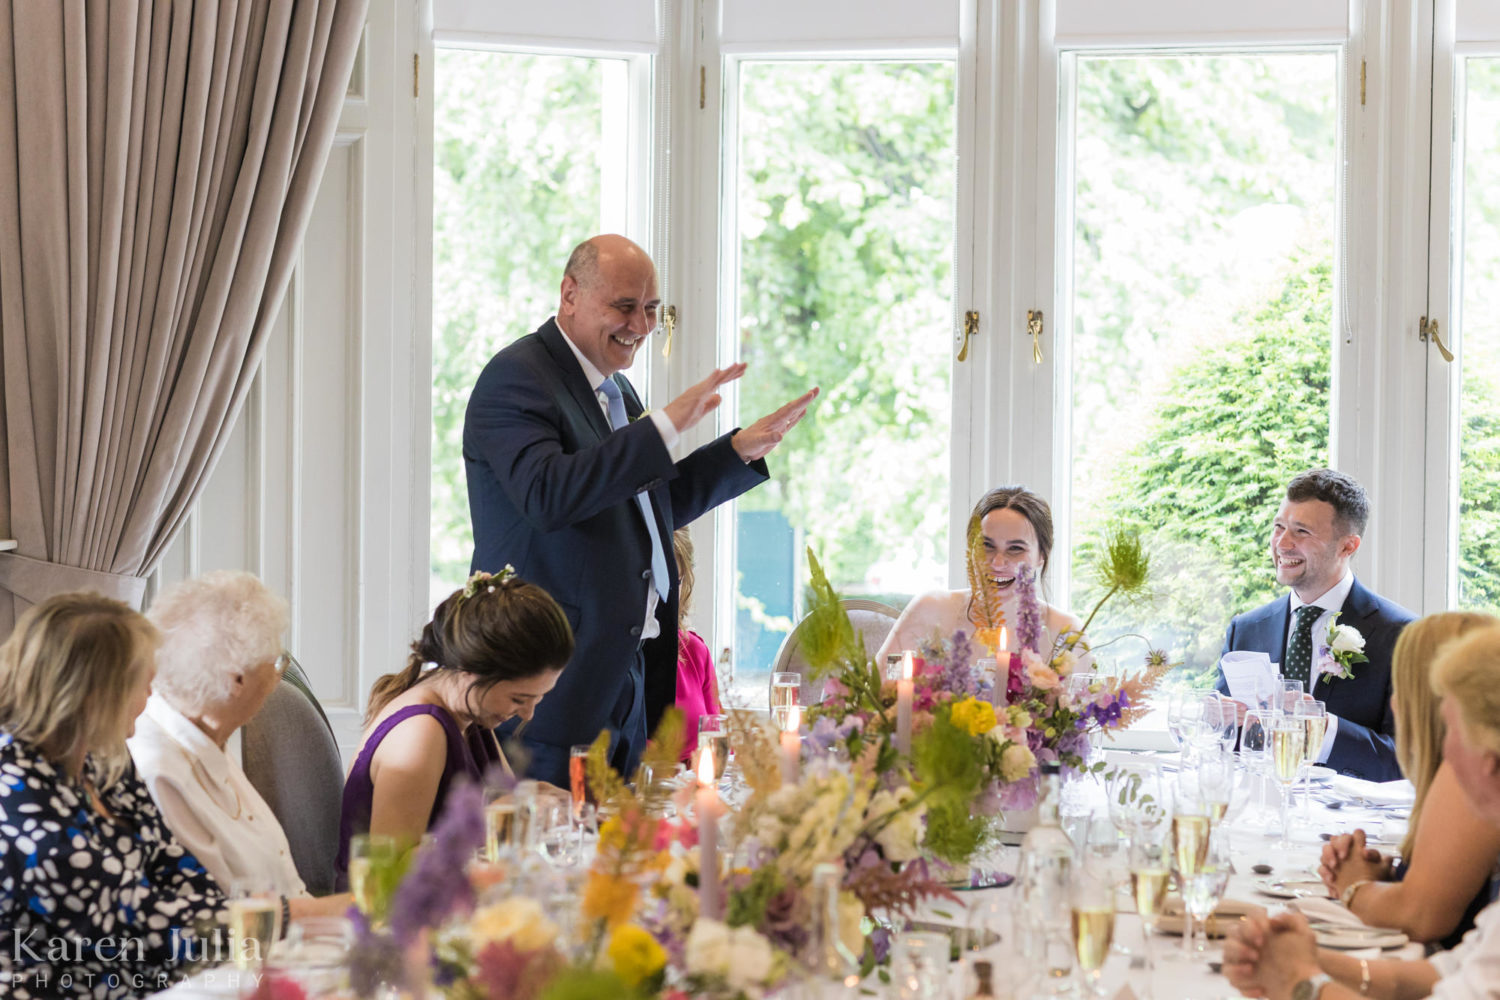 brides dad delivers a speech to the happy couple and their guests